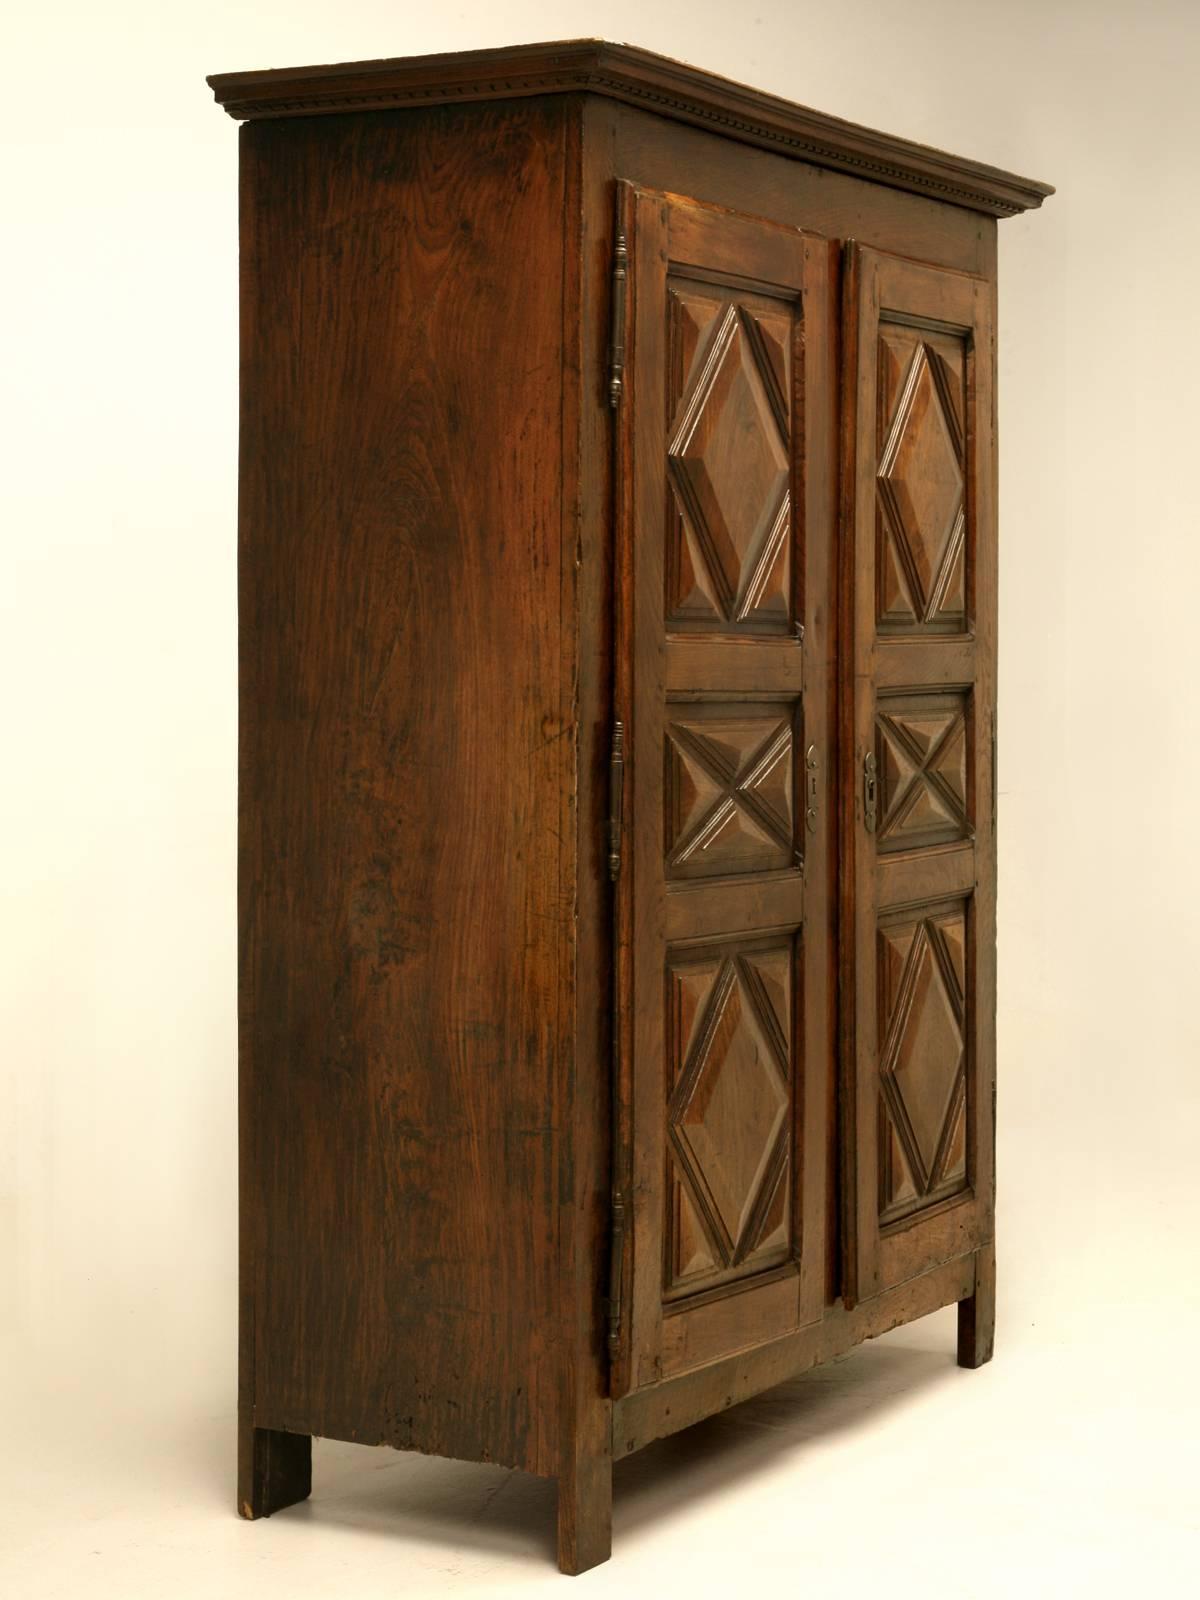 Although King Louis XIII of France died in 1643, his style of furniture has endured centuries and is still being produced to this day. This armoire was made in the 1700s and therefore it would be referred to as, "in the style of Louis